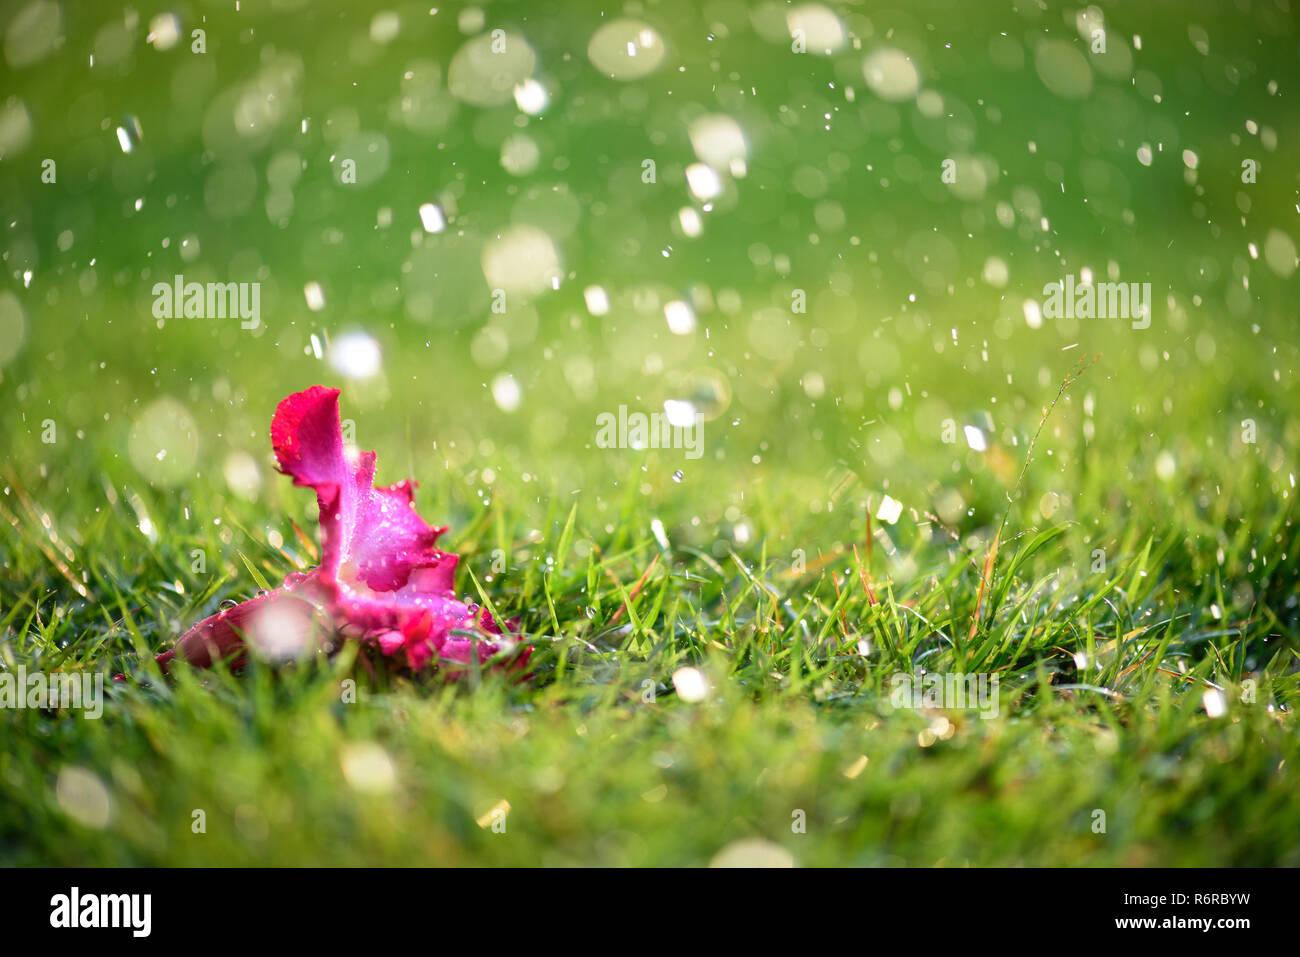 Soft focus of Close up on alone Pink flower with heavy raining on ...